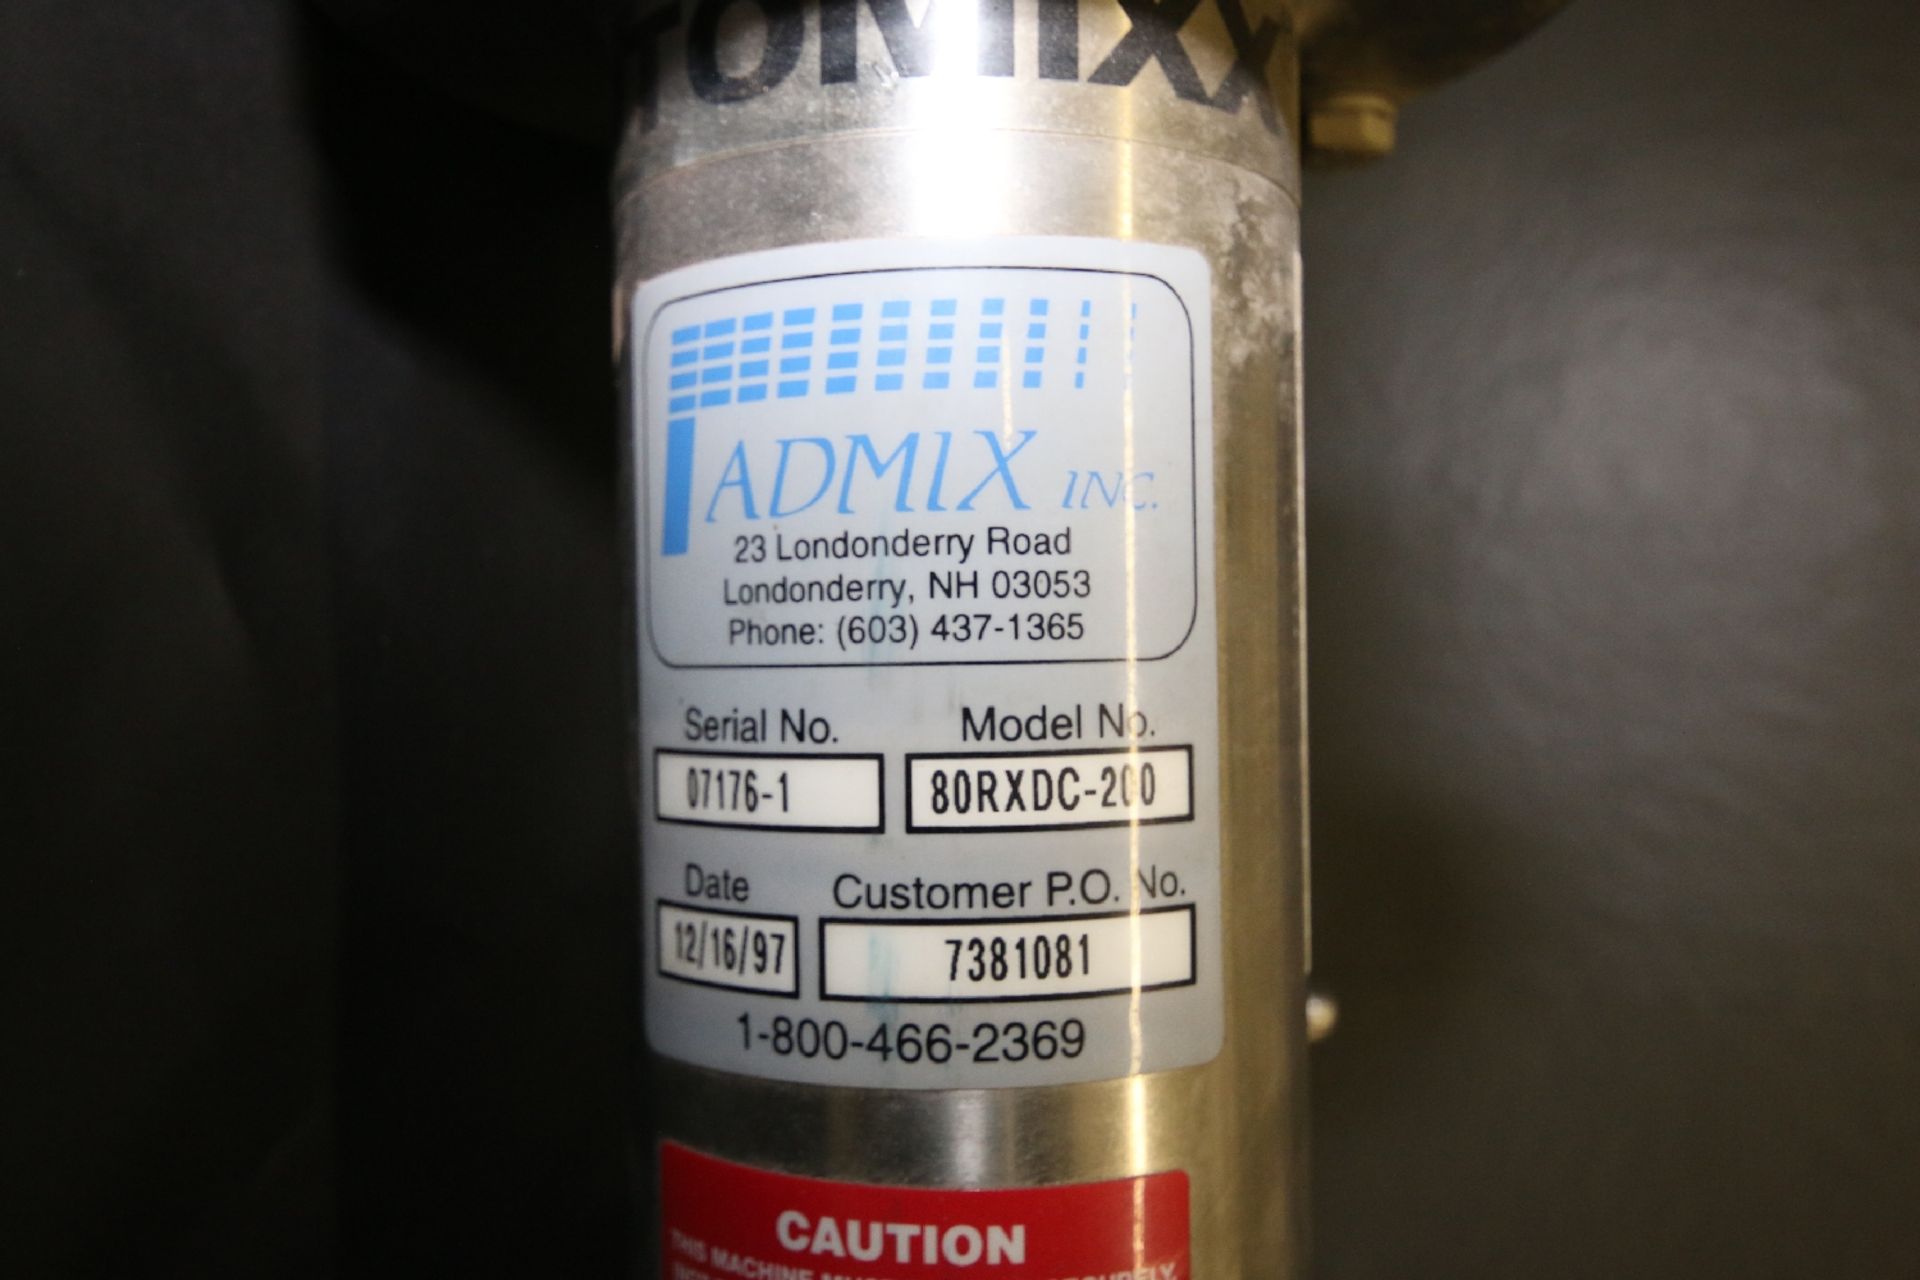 Admix Pneumatic S/S Tank Mixer, Type Rotomix, Model 80RXDC-200, S/N 07176-1 - Image 2 of 2